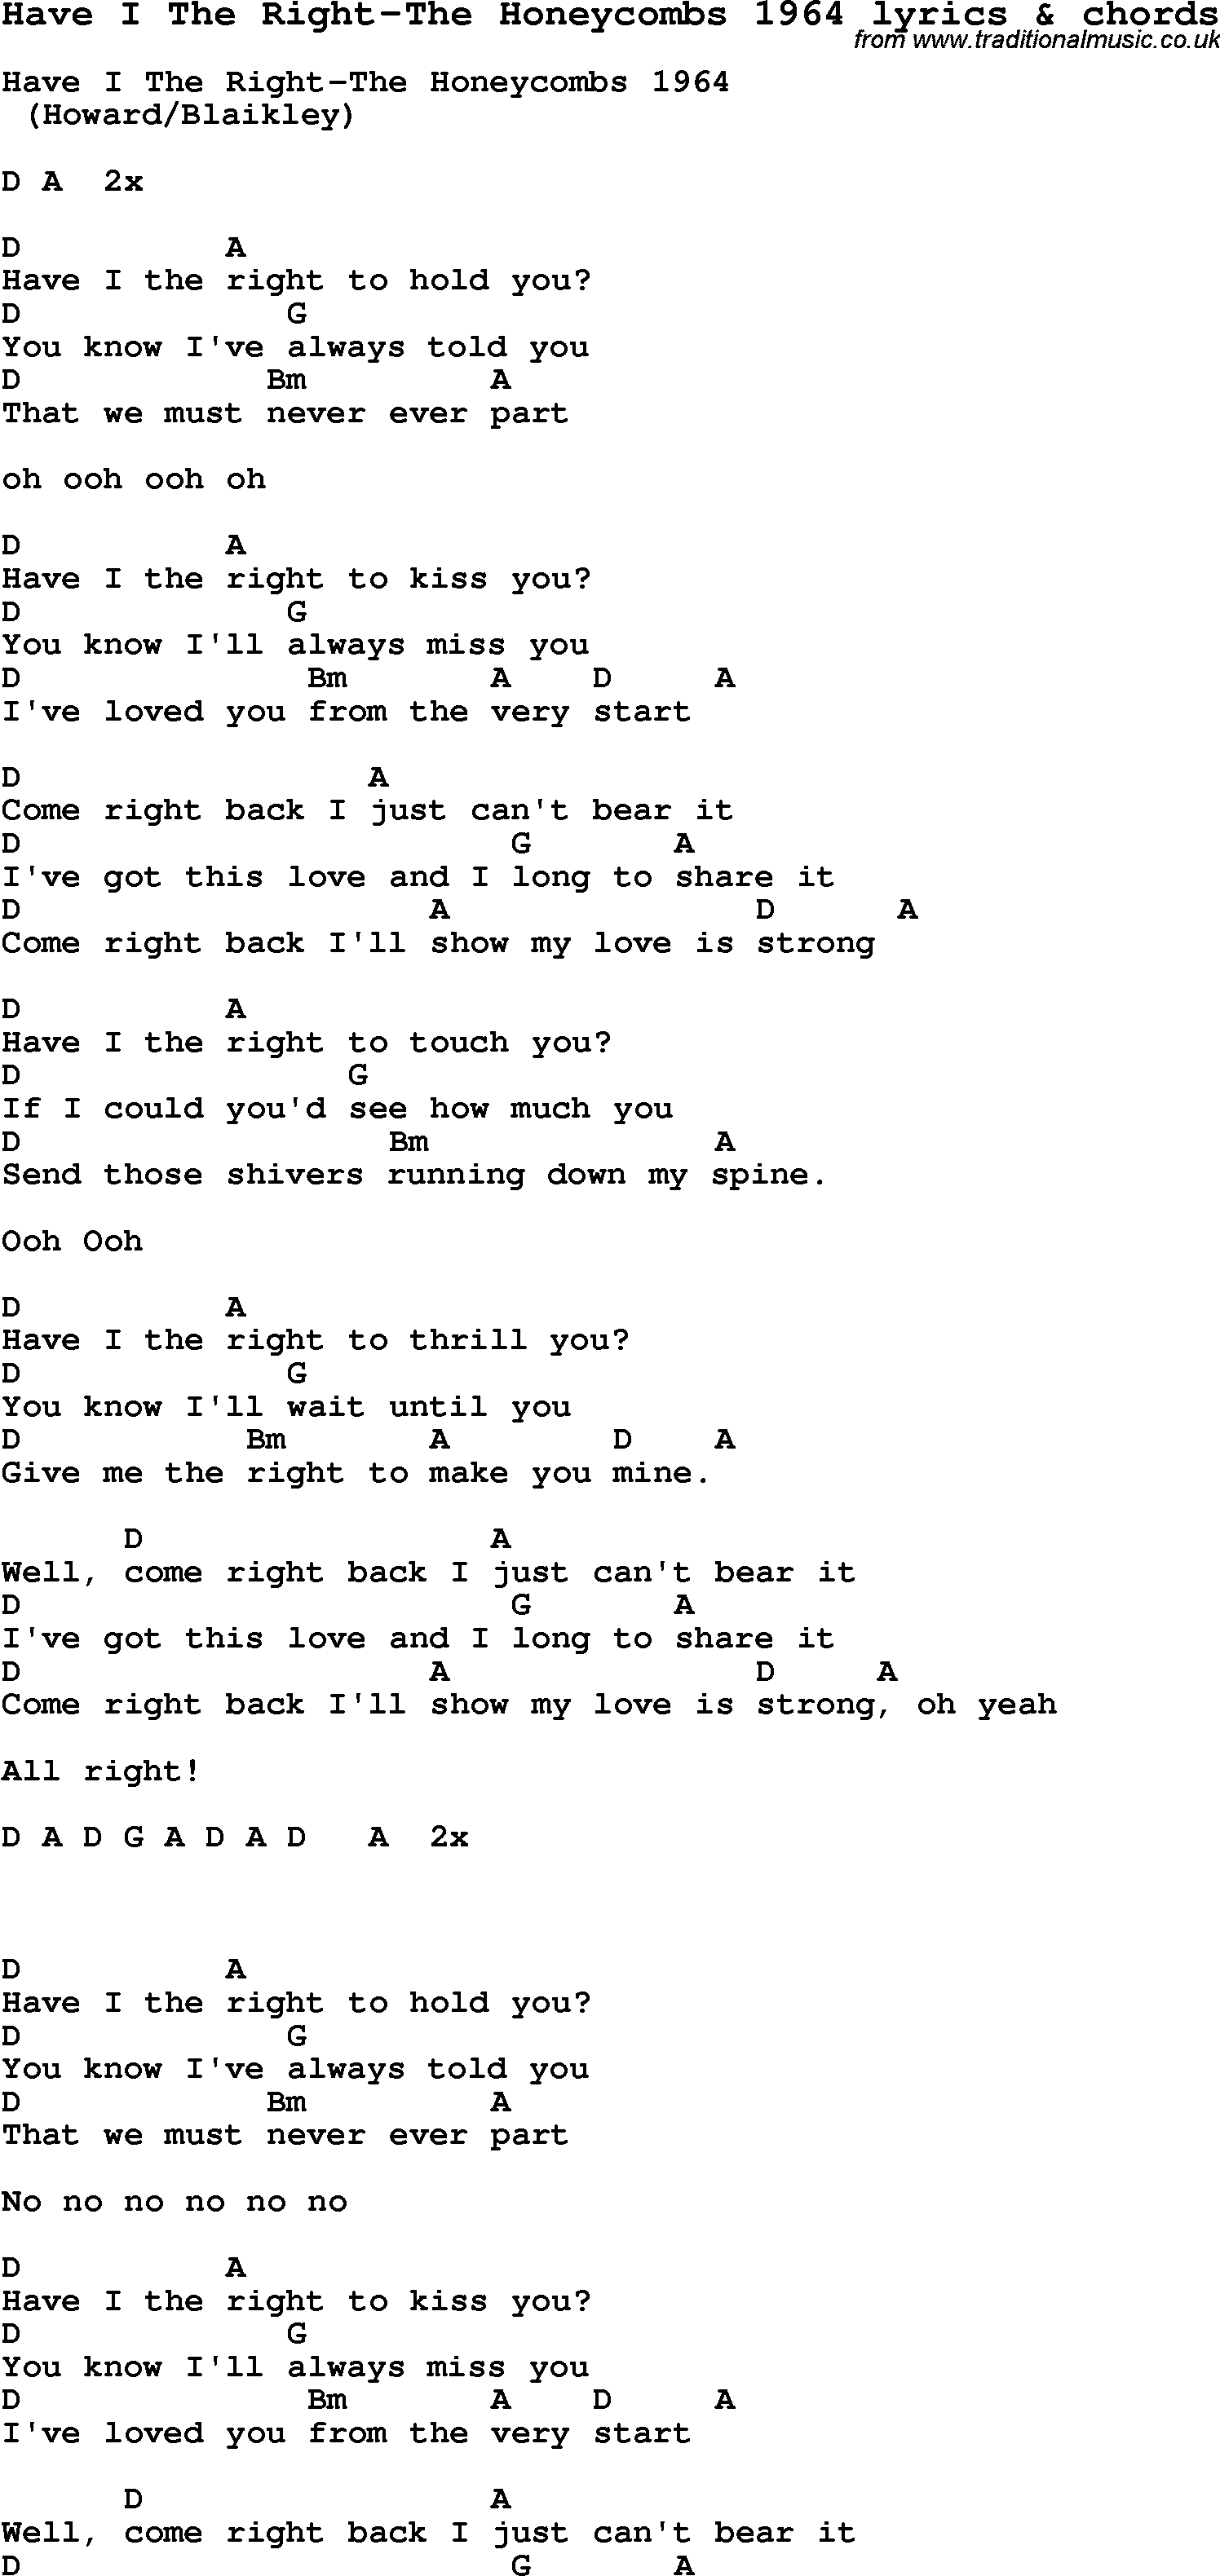 Love Song Lyrics for: Have I The Right-The Honeycombs 1964 with chords for Ukulele, Guitar Banjo etc.